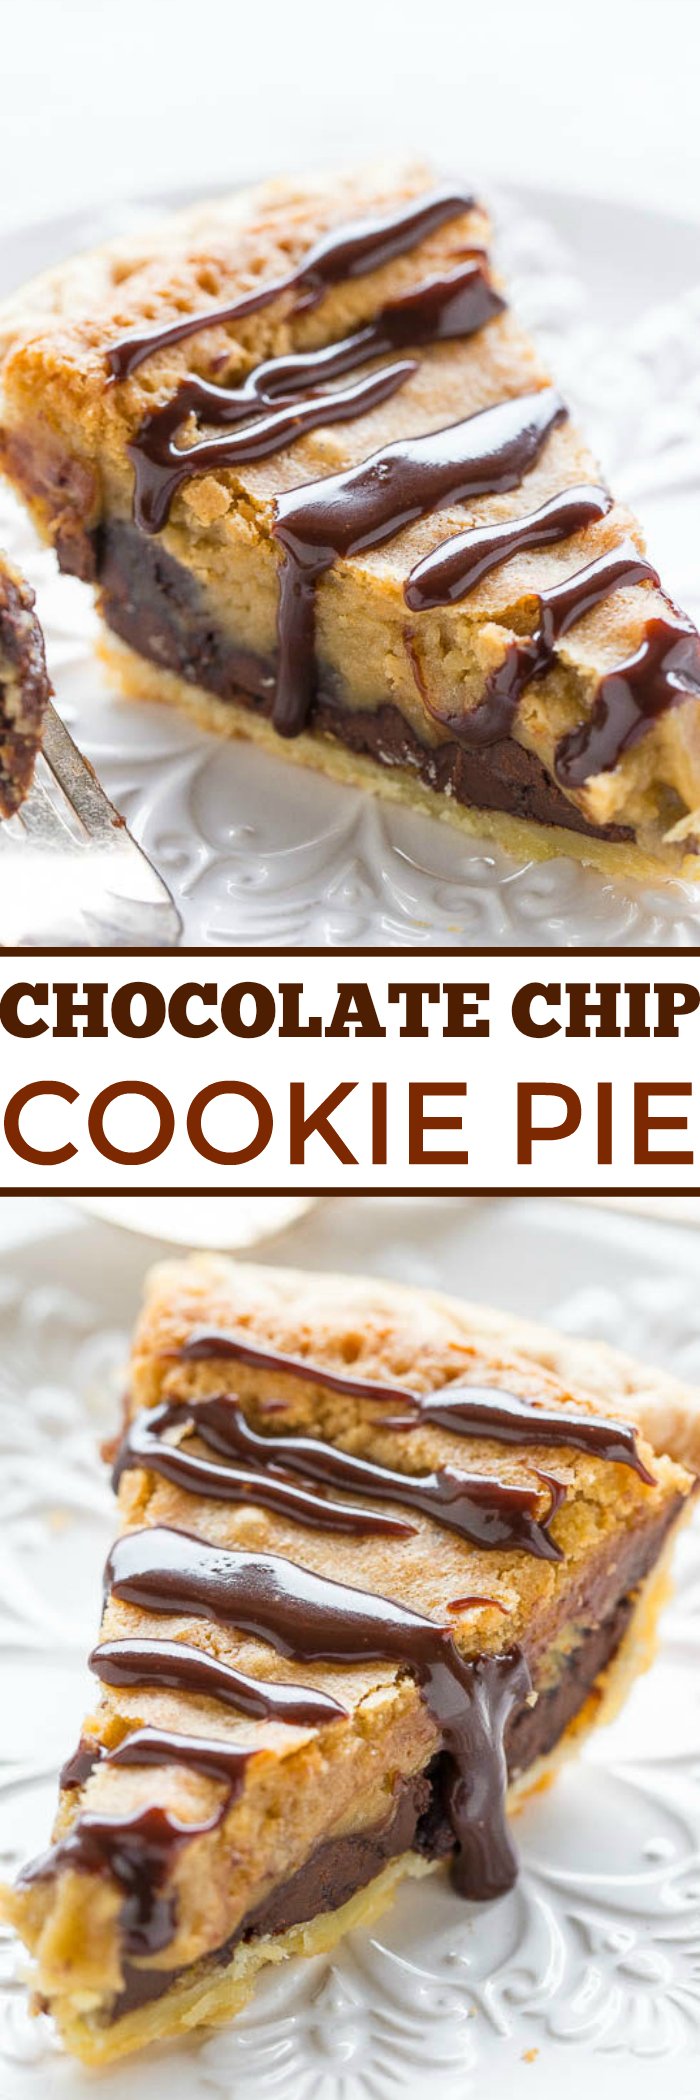 Chocolate Chip Cookie Pie - The filling tastes like the center of an underbaked chocolate chip COOKIE!! Gooey perfection! Easy, rich, decadent, extremely CHOCOLATY and you can use a frozen pie crust!!